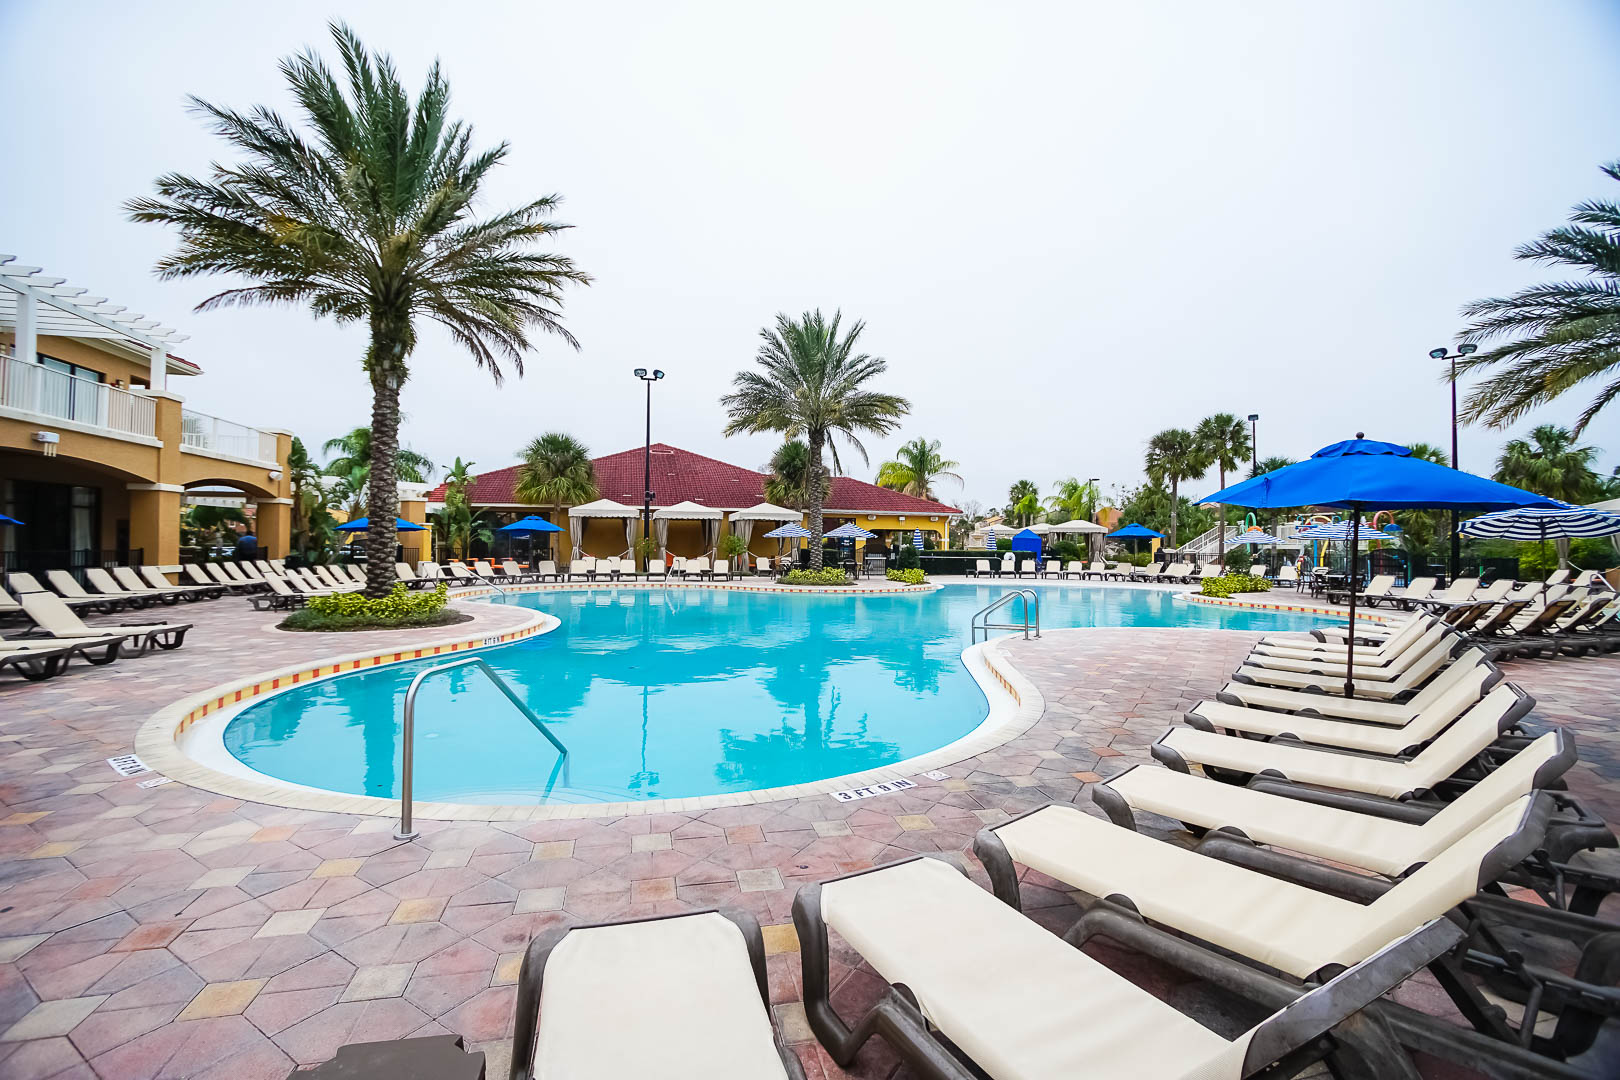 An expansive outdoor swimming pool at VRI's Fantasy World Resort in Florida.